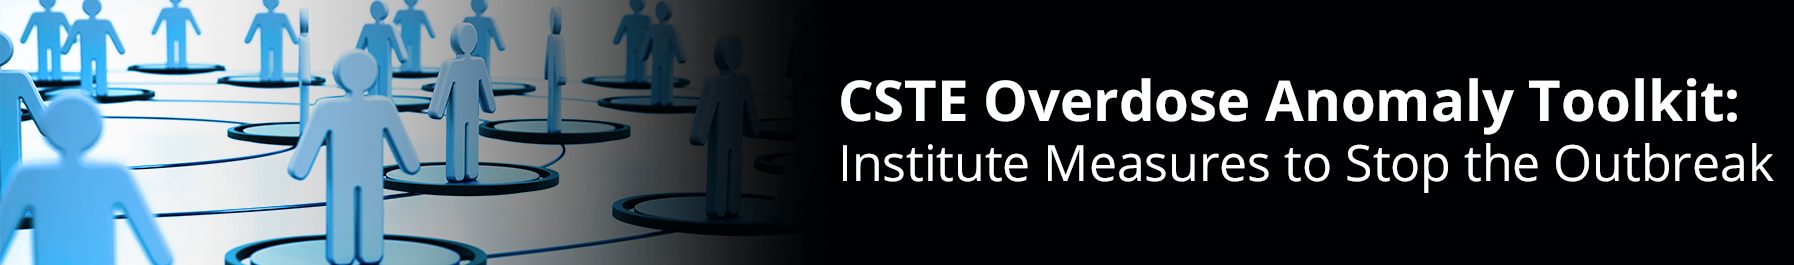 CSTE Overdose Anomaly Toolkit: Institute Measures to Stop the Outbreak